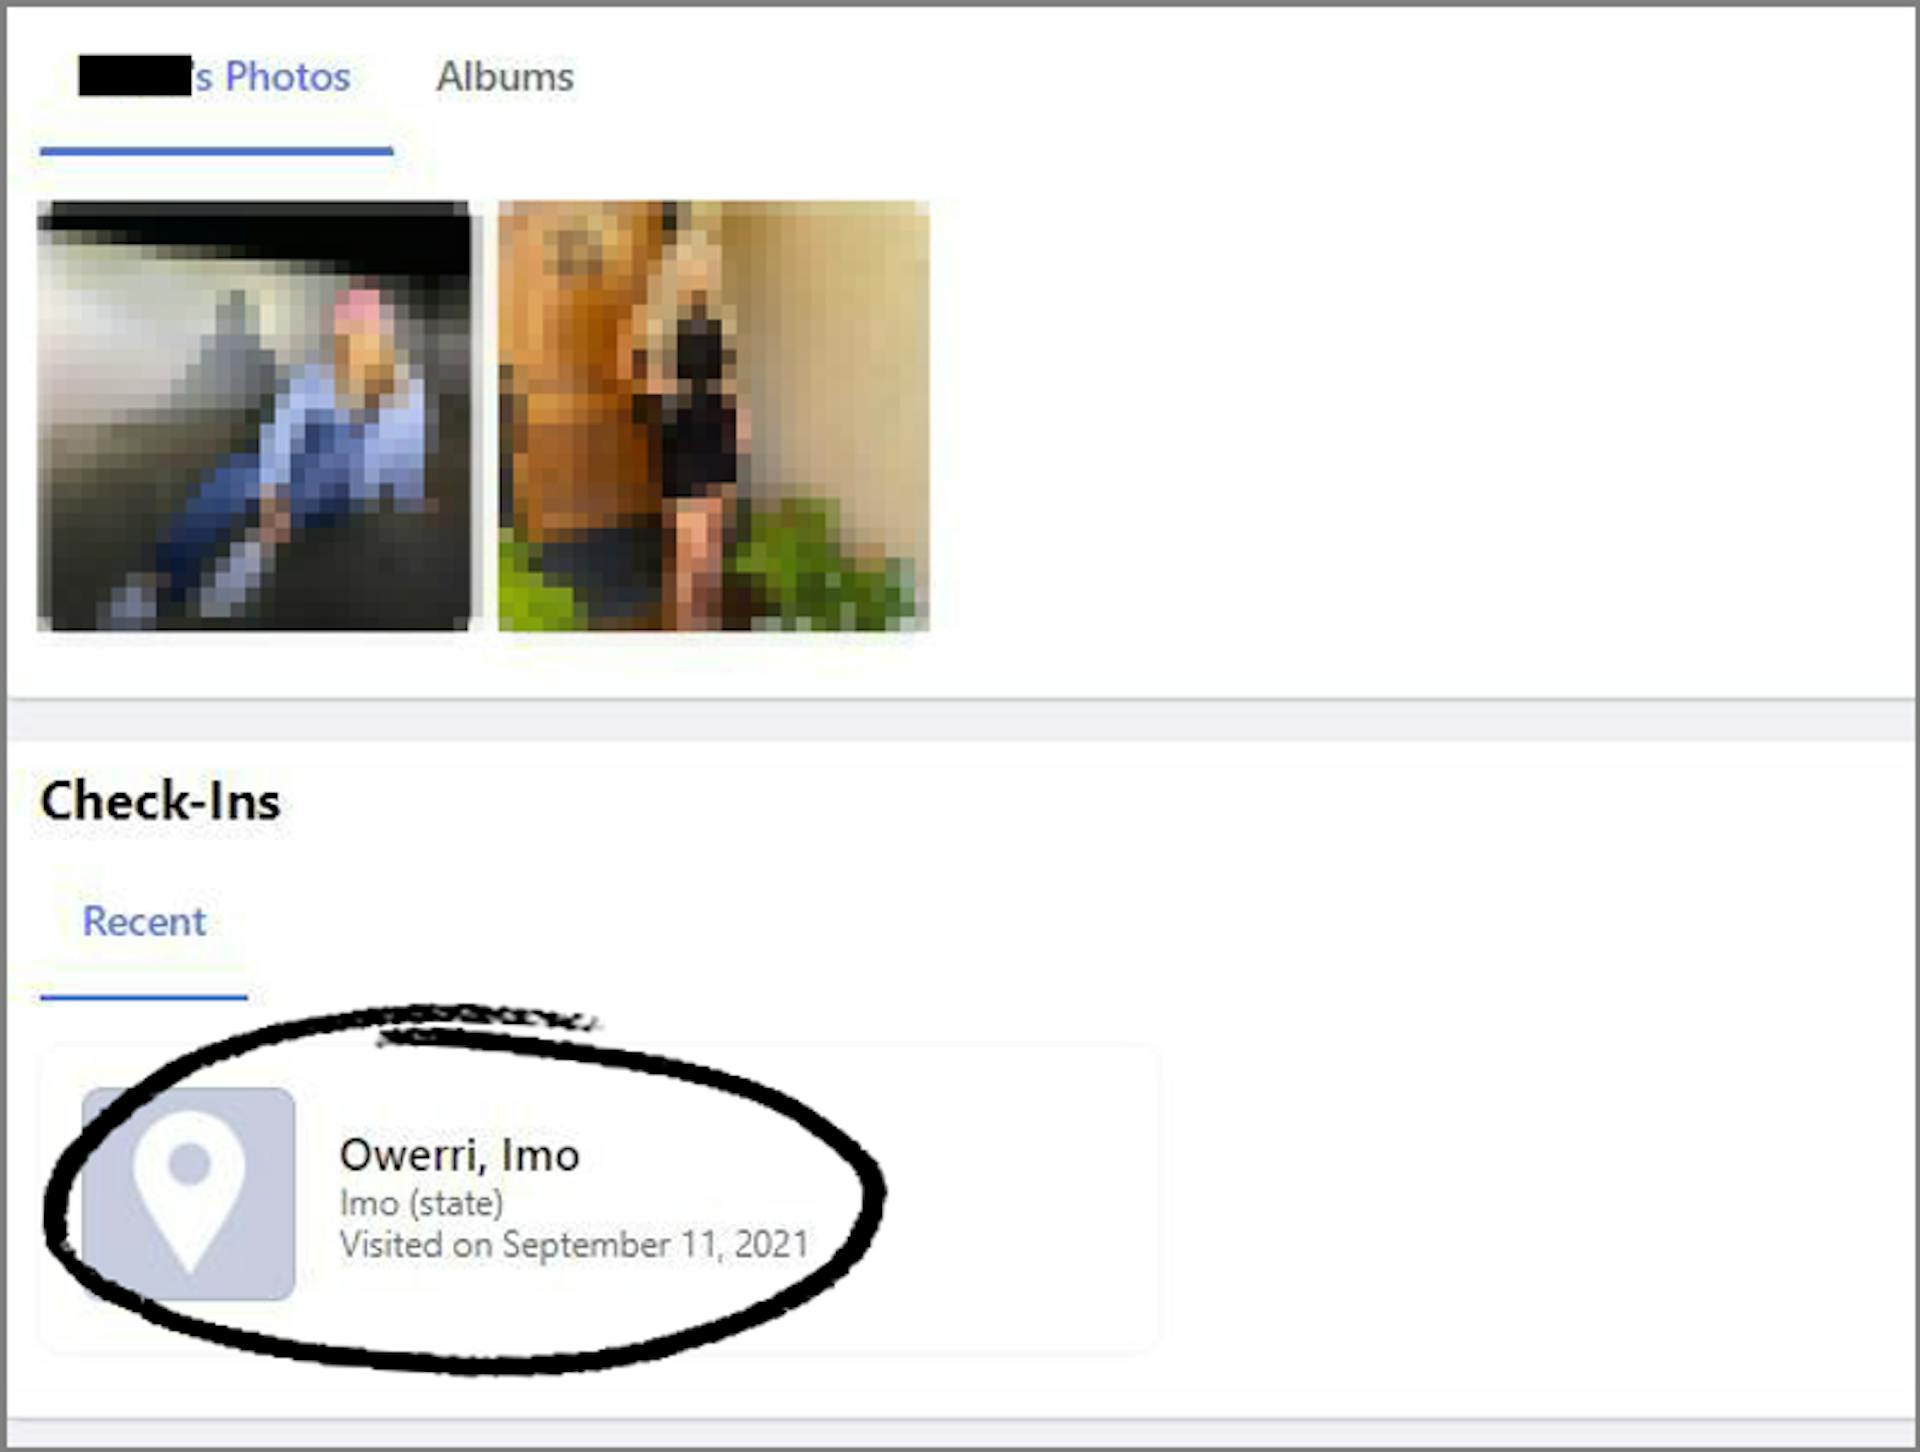 Screenshots from a fake Facebook profile that claimed to belong to a senior manager at Denver International Airport, but which showed a check-in in Owerri, Nigeria. (The ad was removed after an inquiry by ProPublica.)